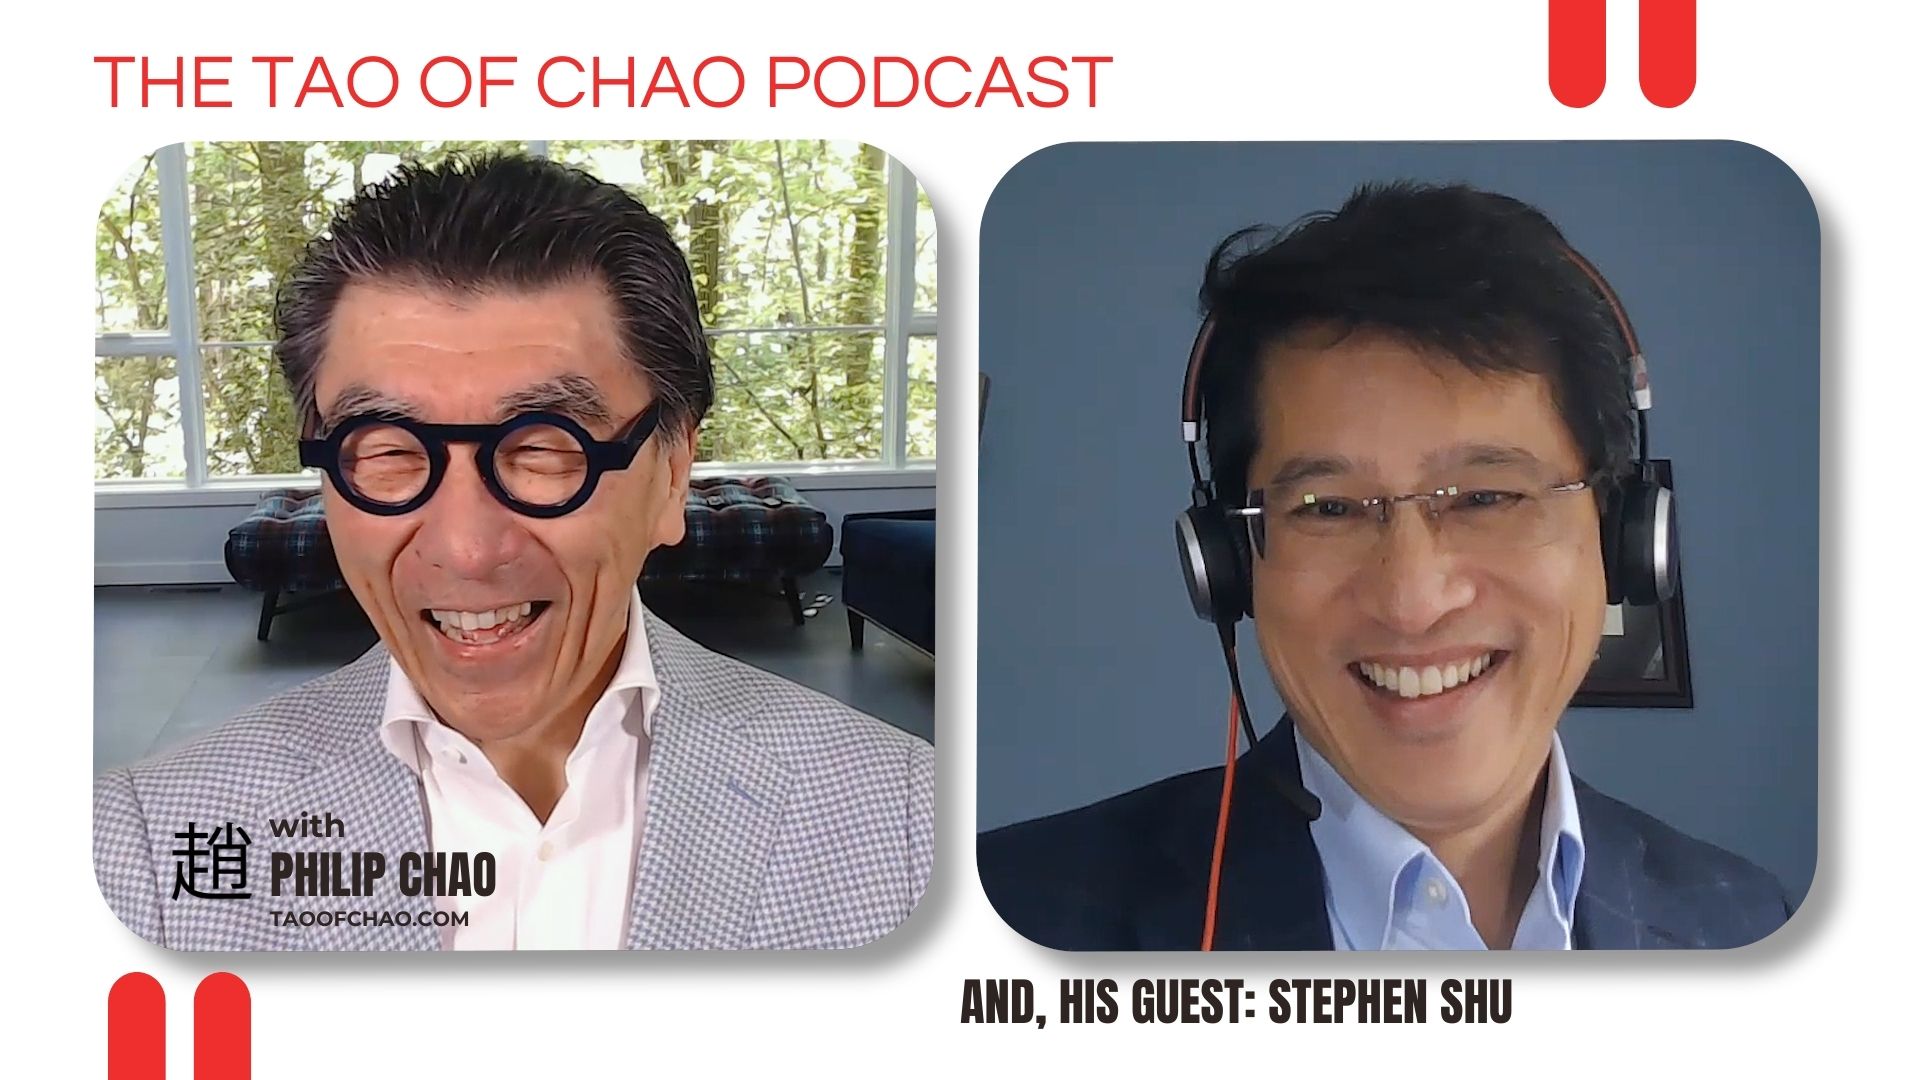 Tao of Chao Podcast with Stephen Shu – Cornell University